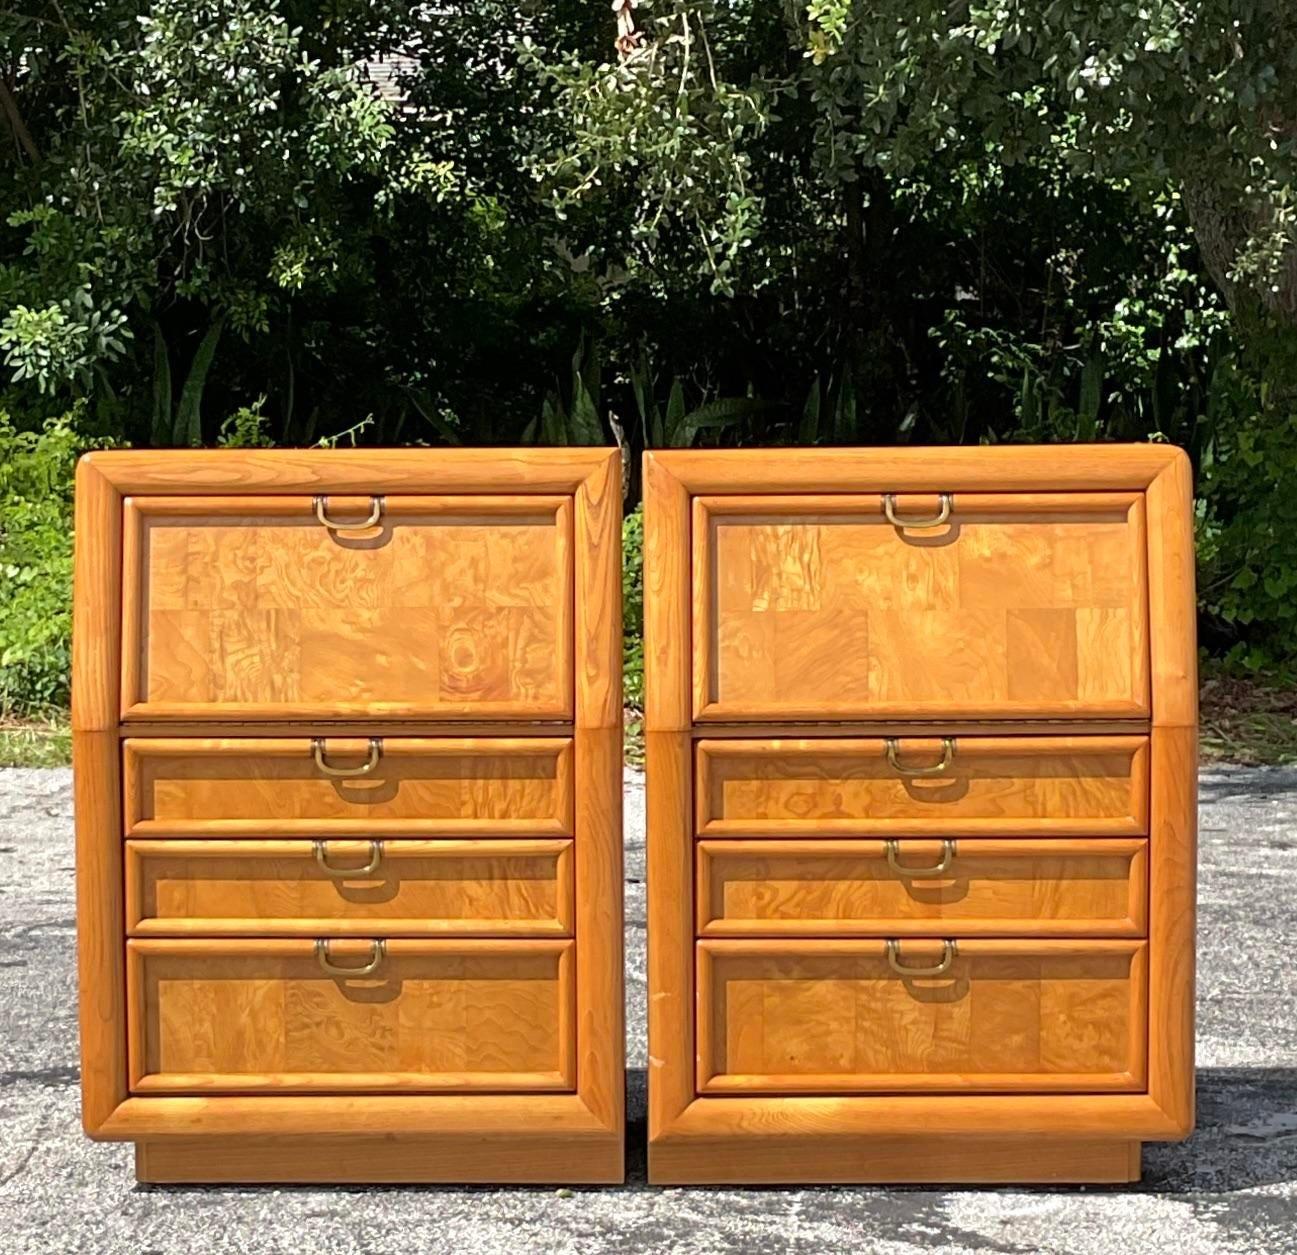 Late 20th Century Vintage Boho Broyhill Burl Wood Nightstands - a Pair For Sale 2